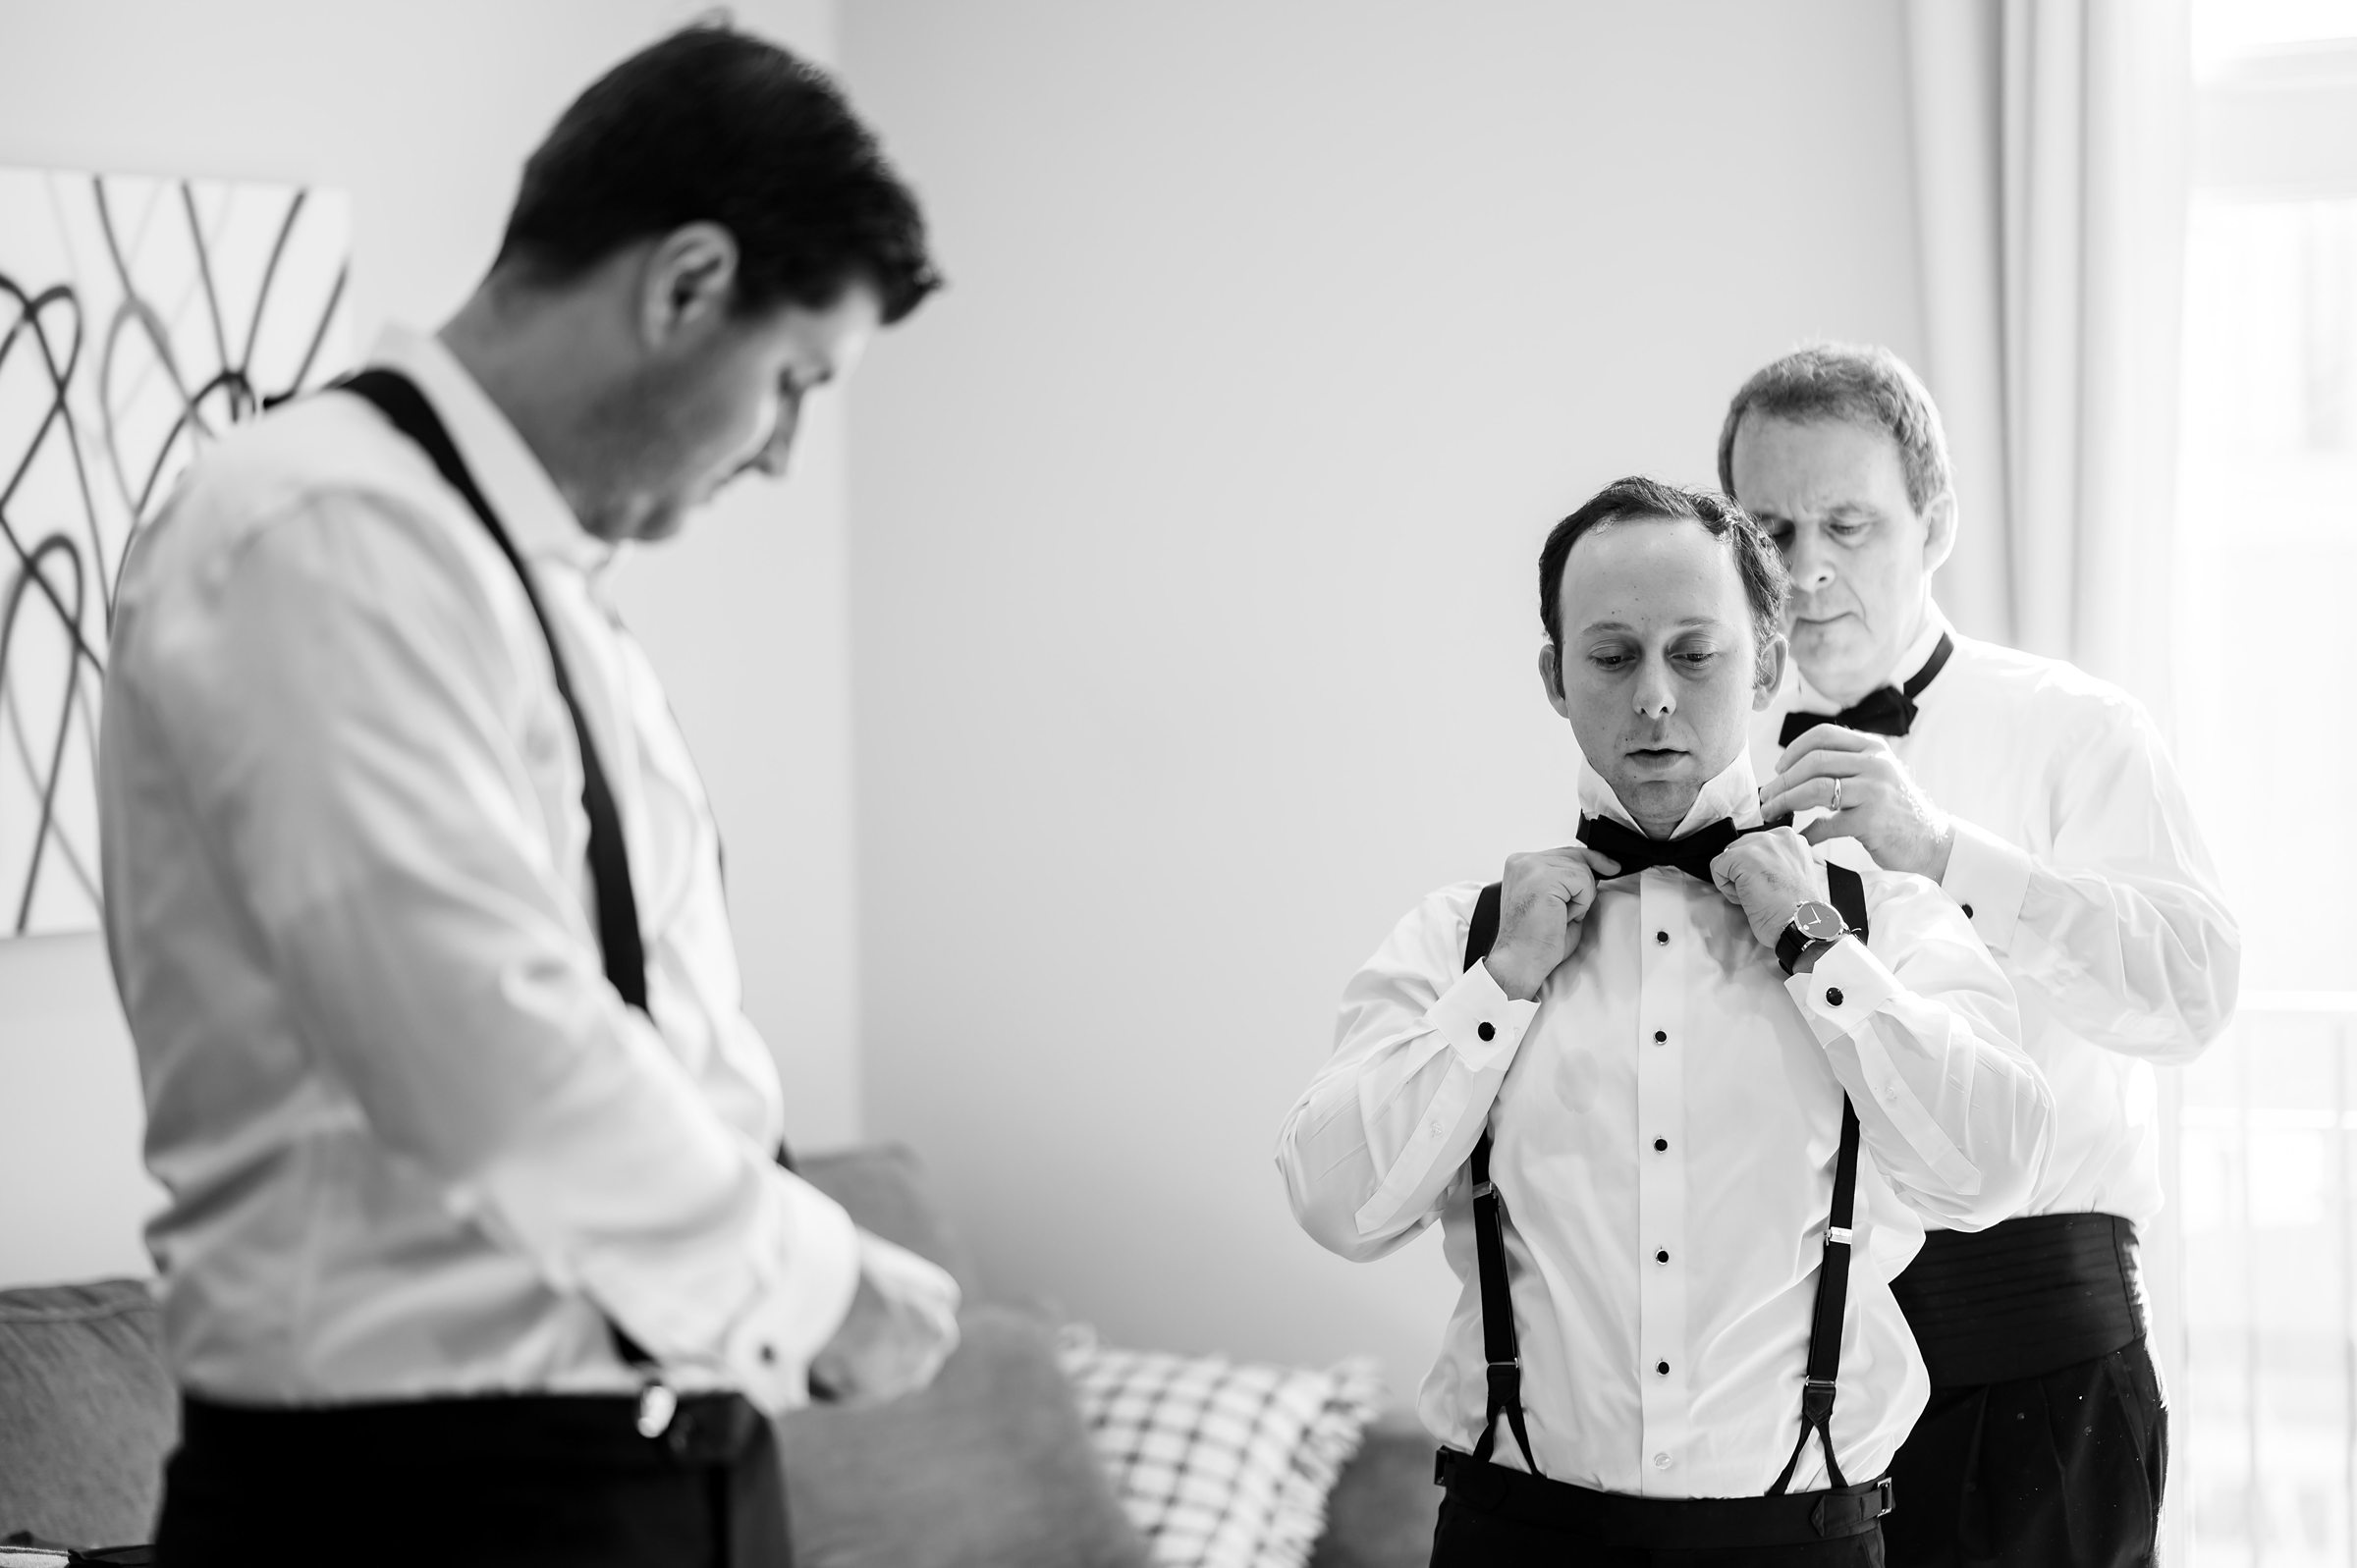 A groom is adjusting his suspenders in this charming black and white photo captured by Lilah Events at a wedding.